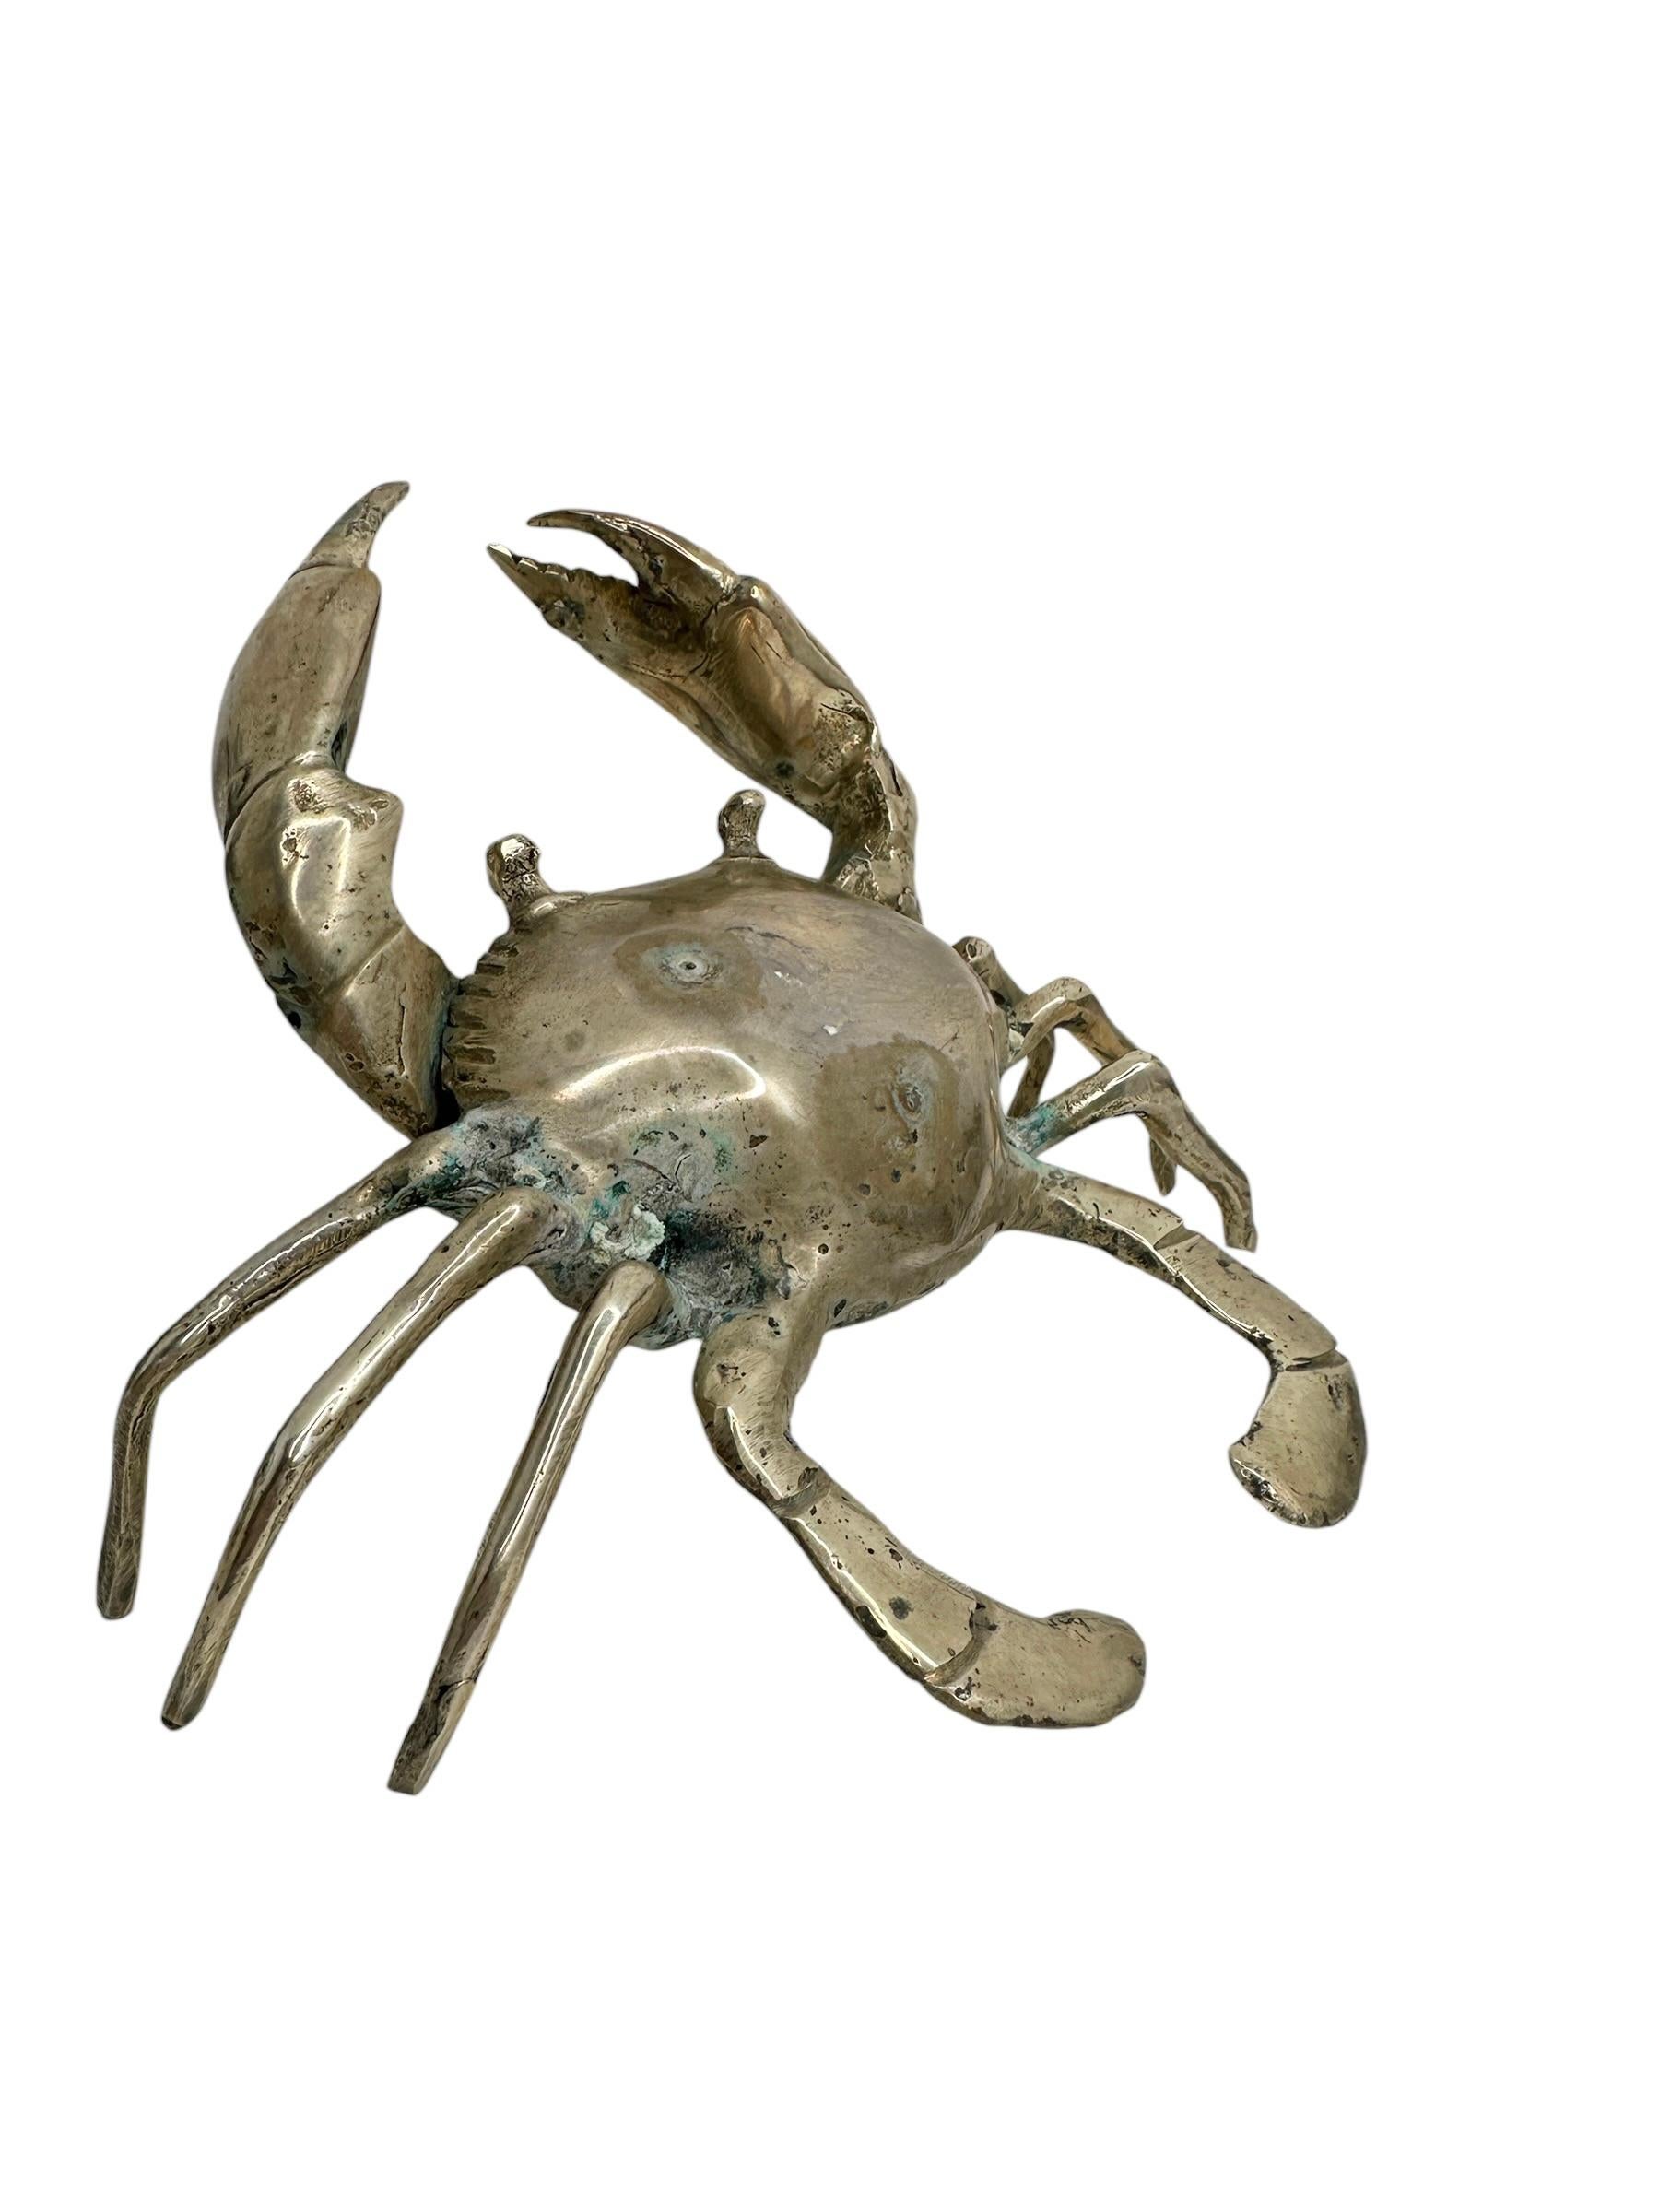 This nickel plated metal crab statue was most likely made in the 1980s in Italy. Can not tell the maker or the artist and it is not signed. This particular crab statue is a beautiful piece, it can be displayed as a sculptural focal point on a